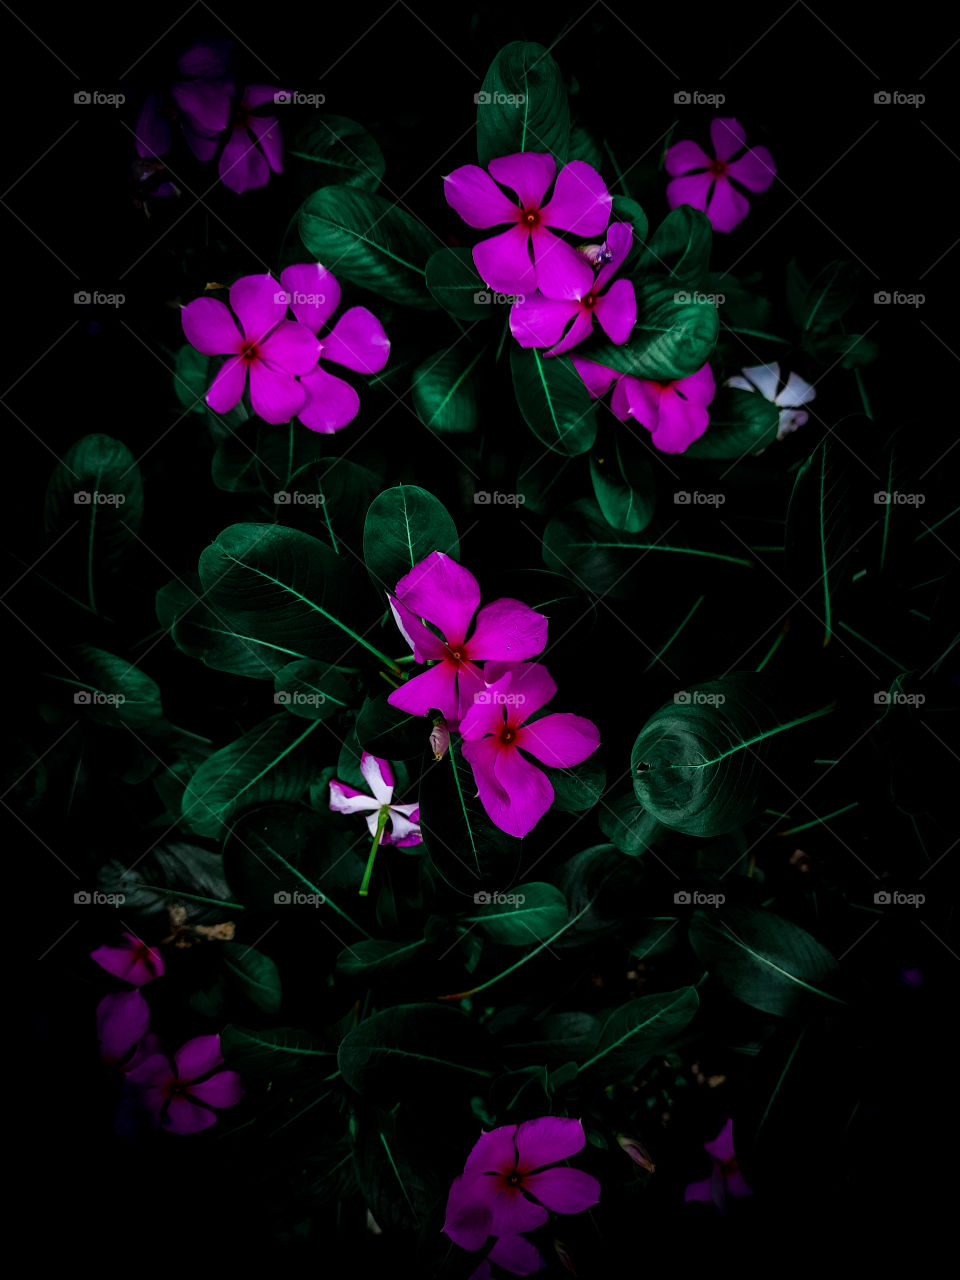 Catharanthus roseus... It is an subshrub or hebaceous plant. The species has long been cultivated for herbal medicines. Some medication used to treat several types of cancers, the extracts of its roots used against many diseases, are found in Plants.